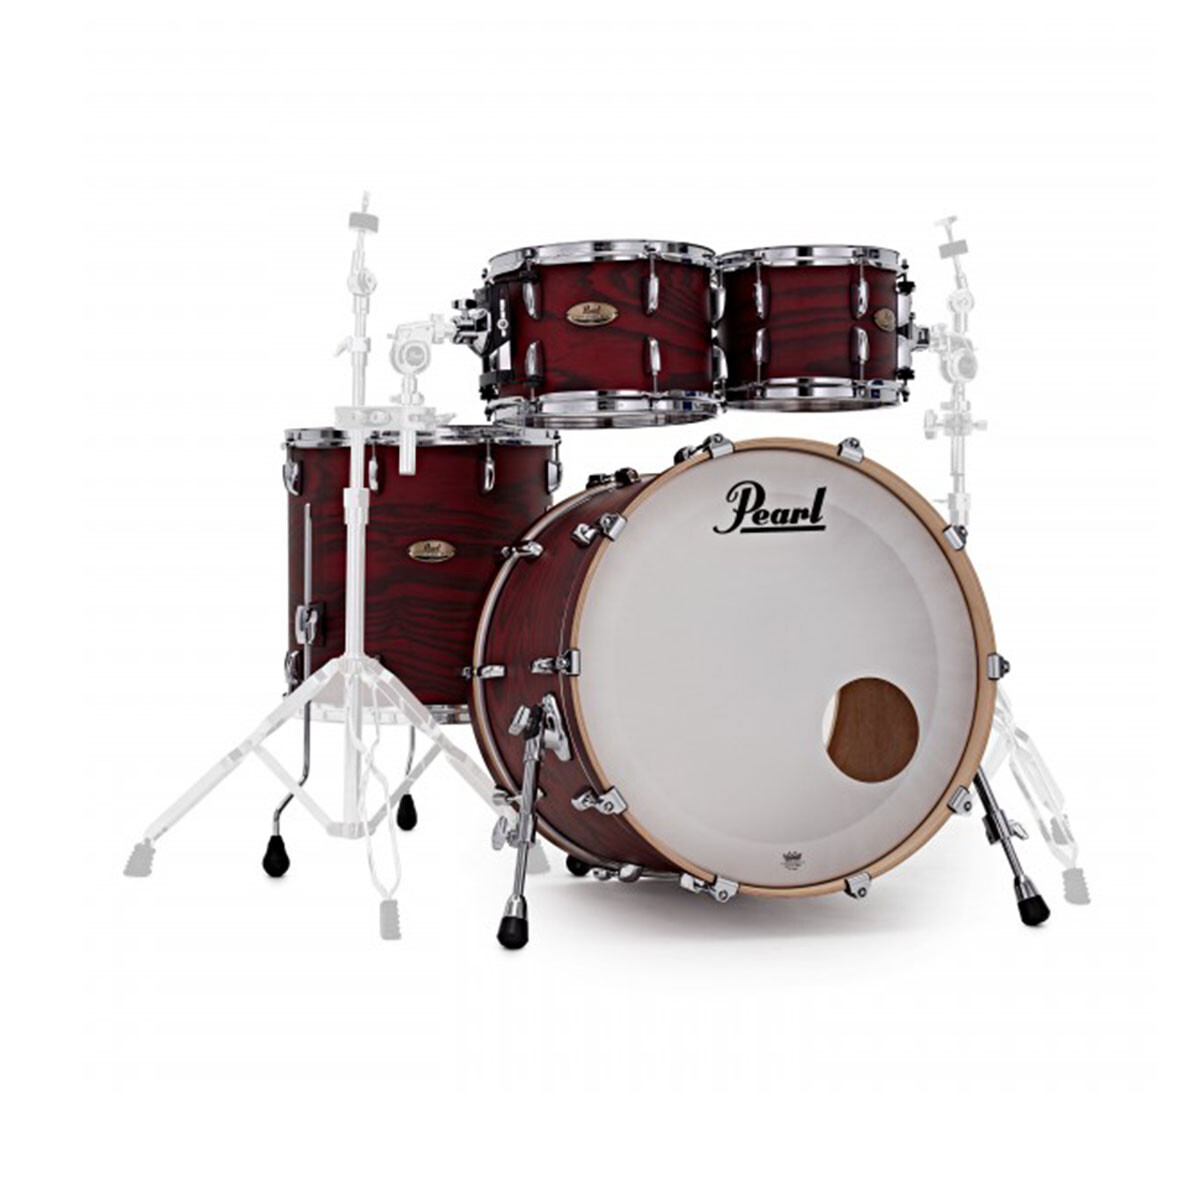 Bateria Pearl Session Studio Sts924xsp847 Scarlet Ash 5 Cuerpos 